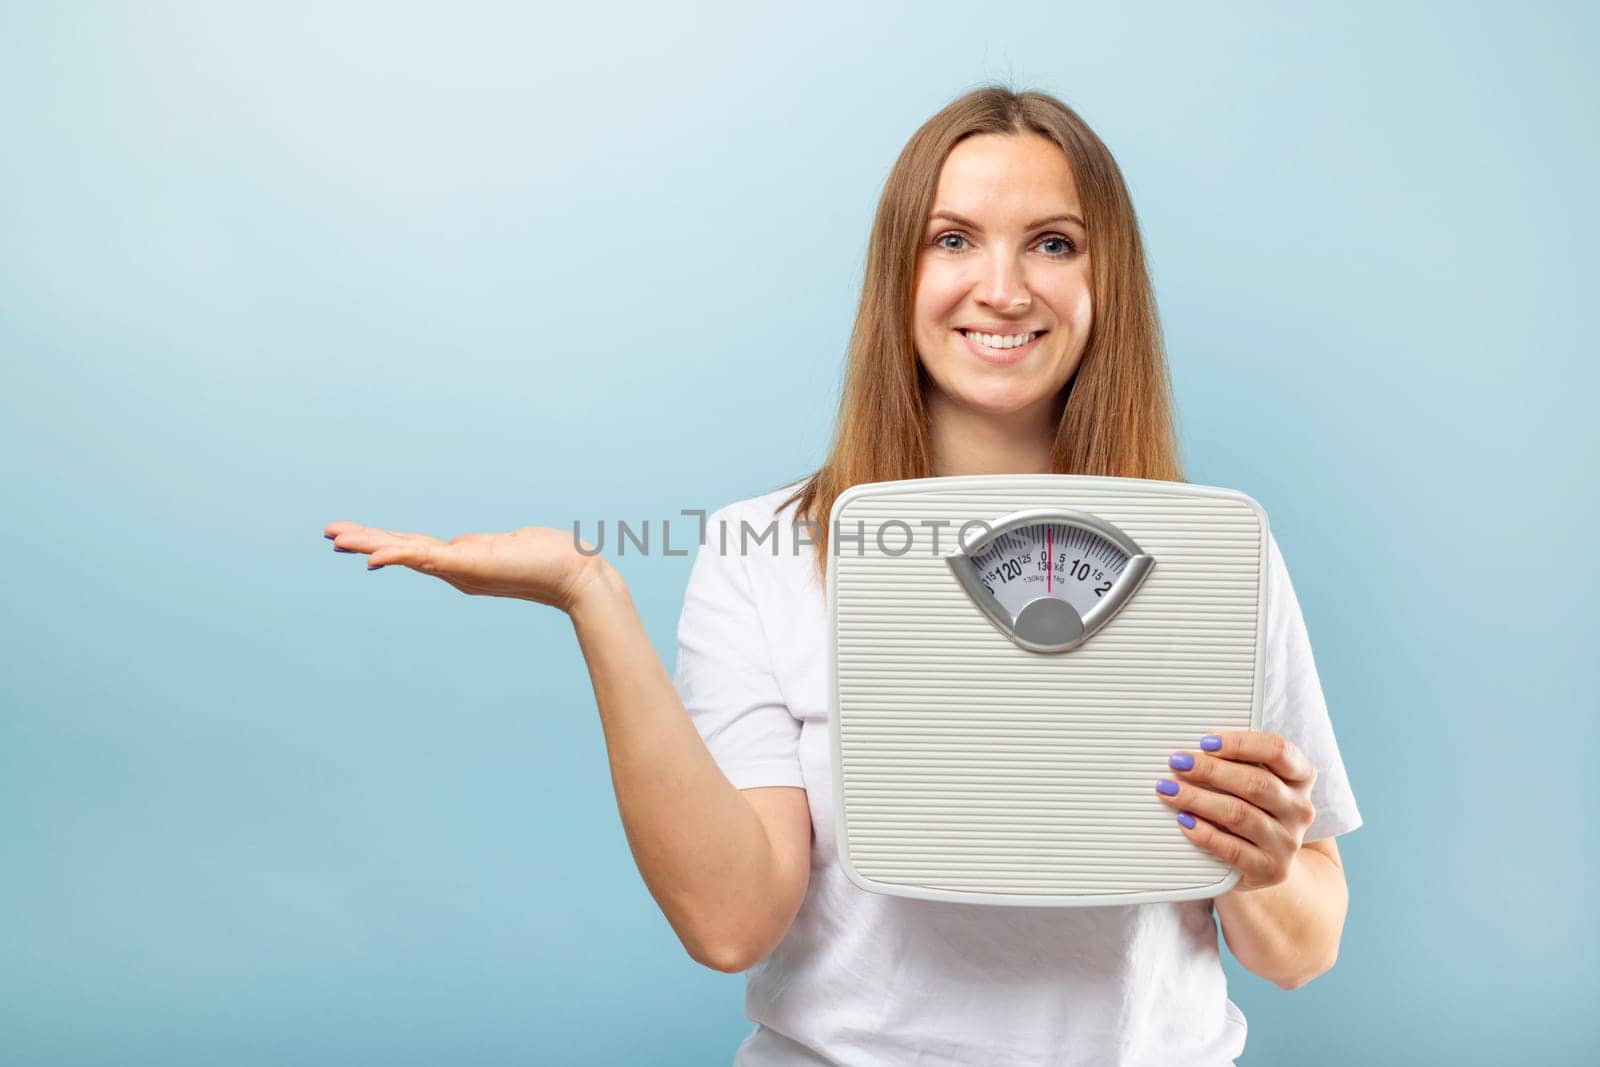 Cheerful woman holding a bathroom scale, making a presenting gesture with her hand against a light blue background.